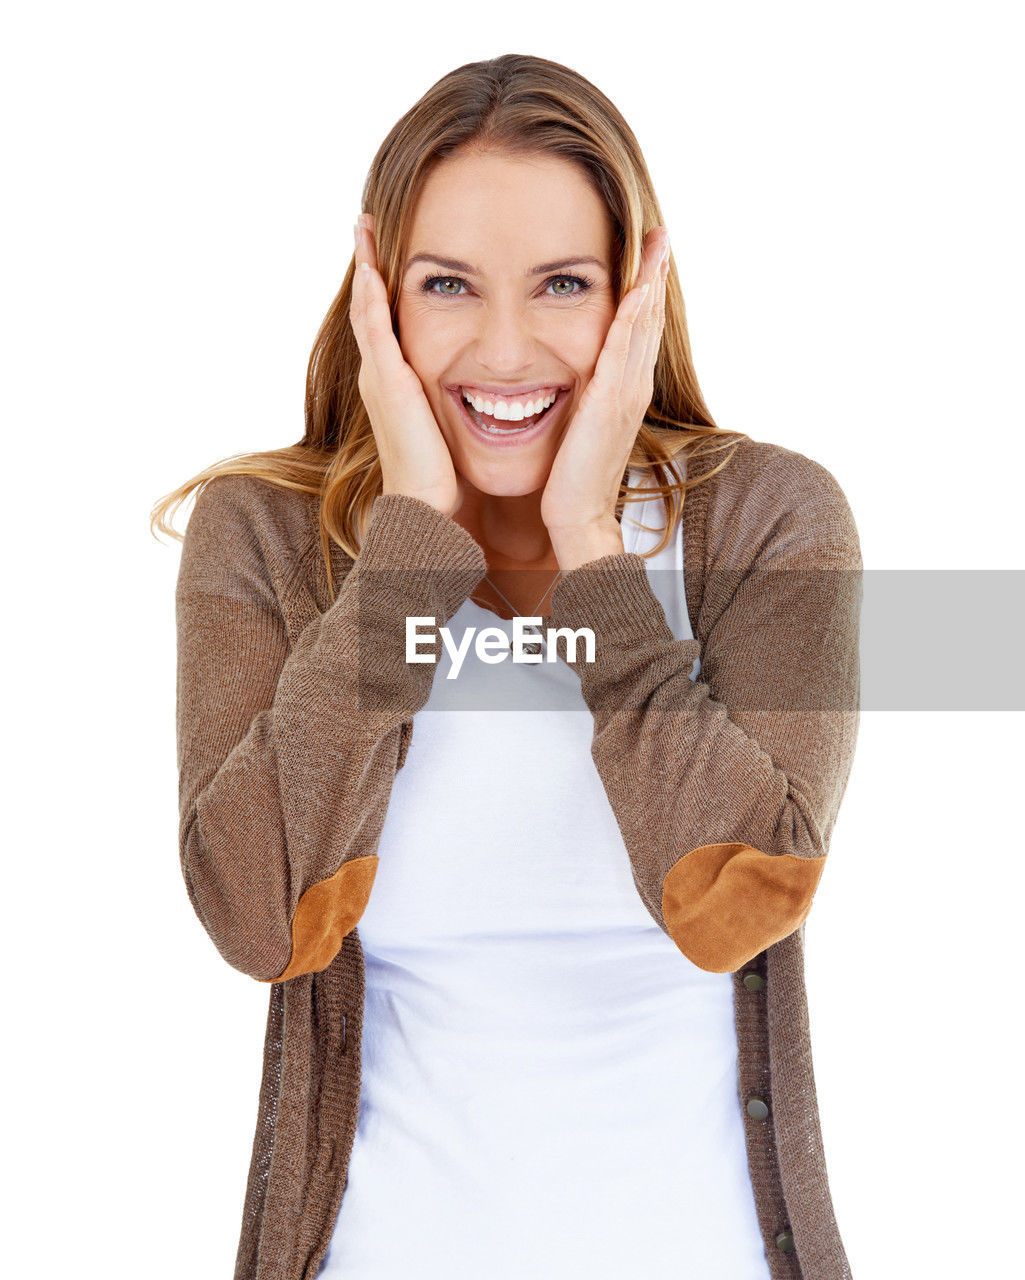 smiling, women, portrait, sleeve, adult, one person, looking at camera, happiness, outerwear, white background, emotion, studio shot, clothing, cut out, young adult, cheerful, female, indoors, teeth, smile, brown, cute, casual clothing, positive emotion, blond hair, relaxation, front view, hairstyle, hand, lifestyles, standing, waist up, long hair, fashion, finger, sweater, white, t-shirt, laughing, enjoyment, arm, joy, person, fun, collar, copy space